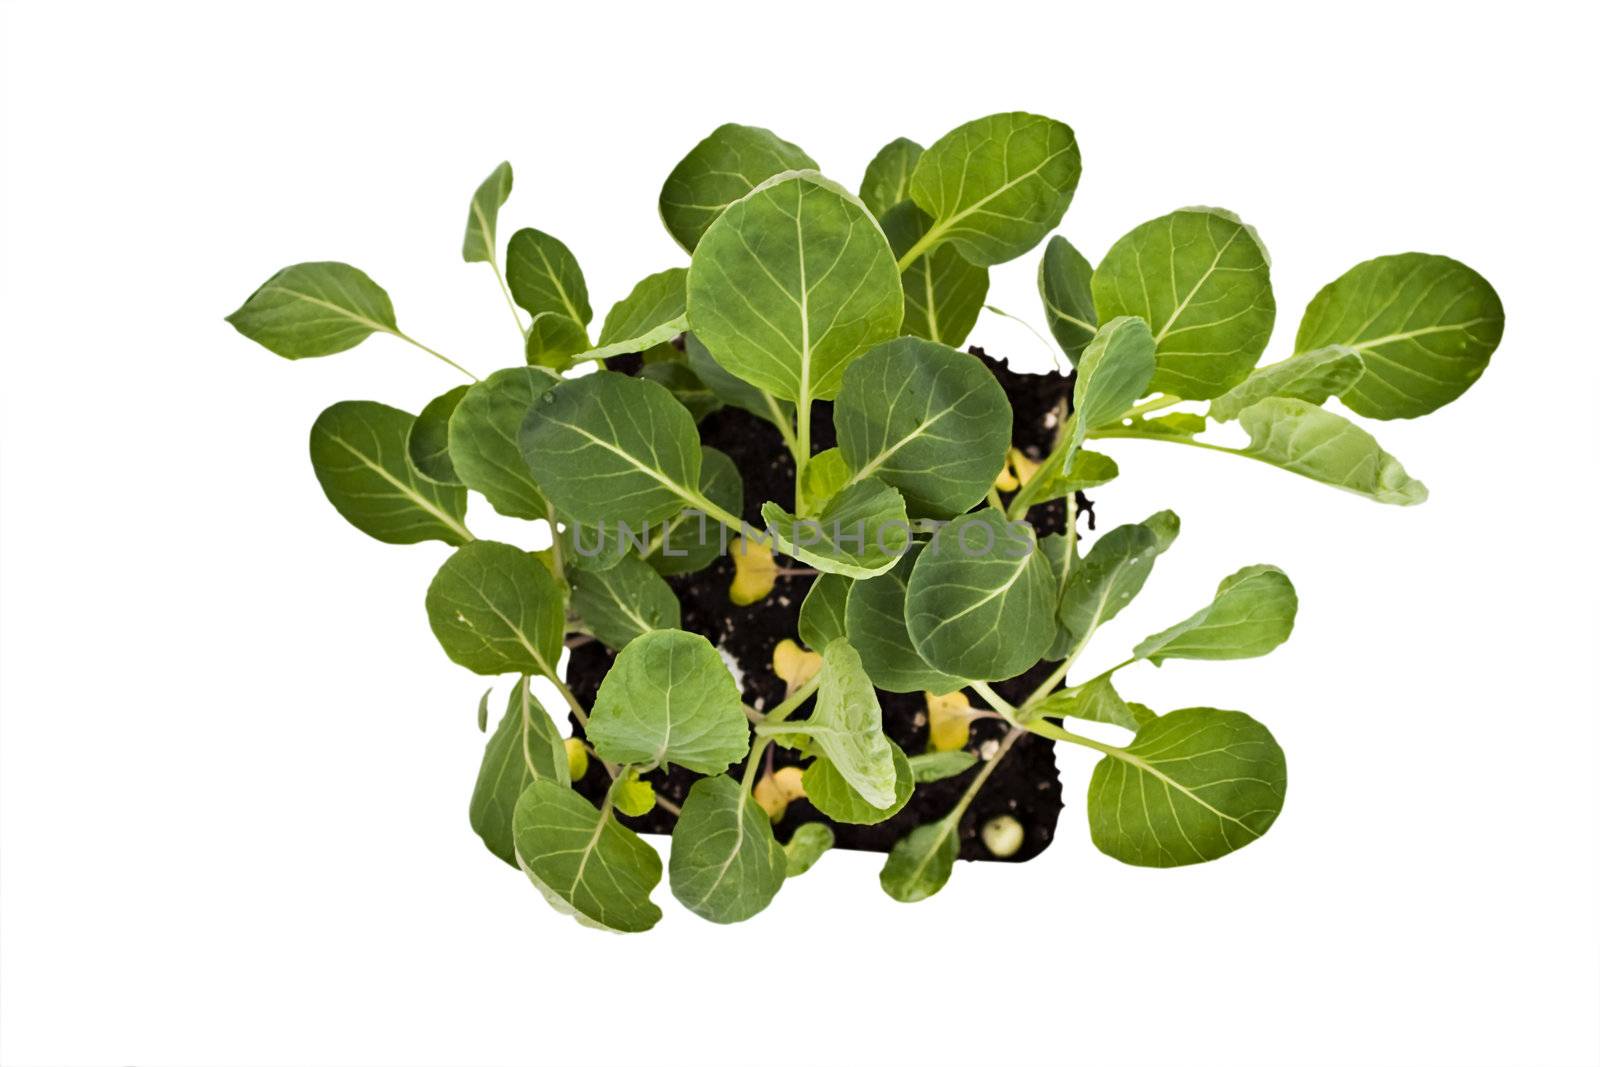 Broccoli plants isolated on white